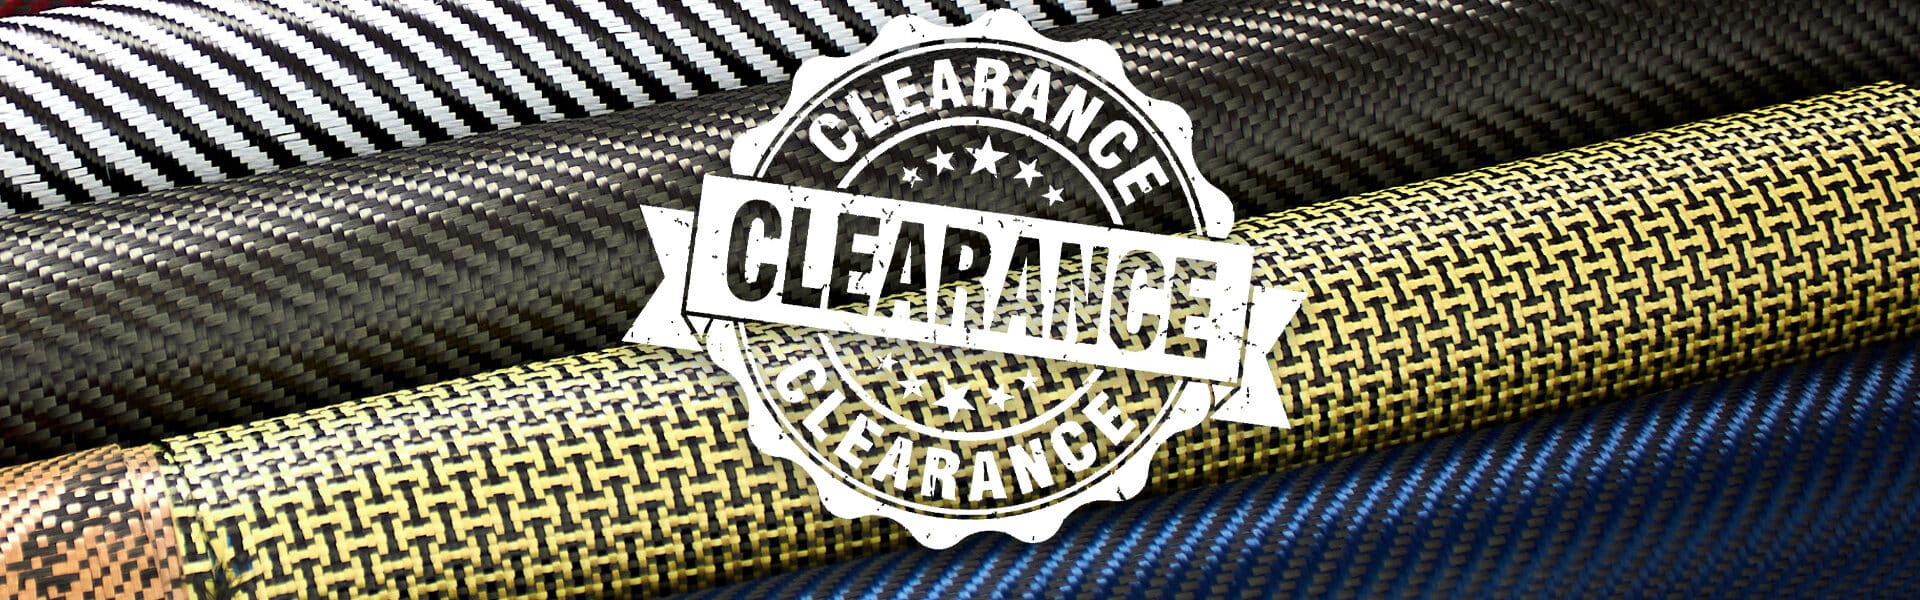 Clearance Section Now Open